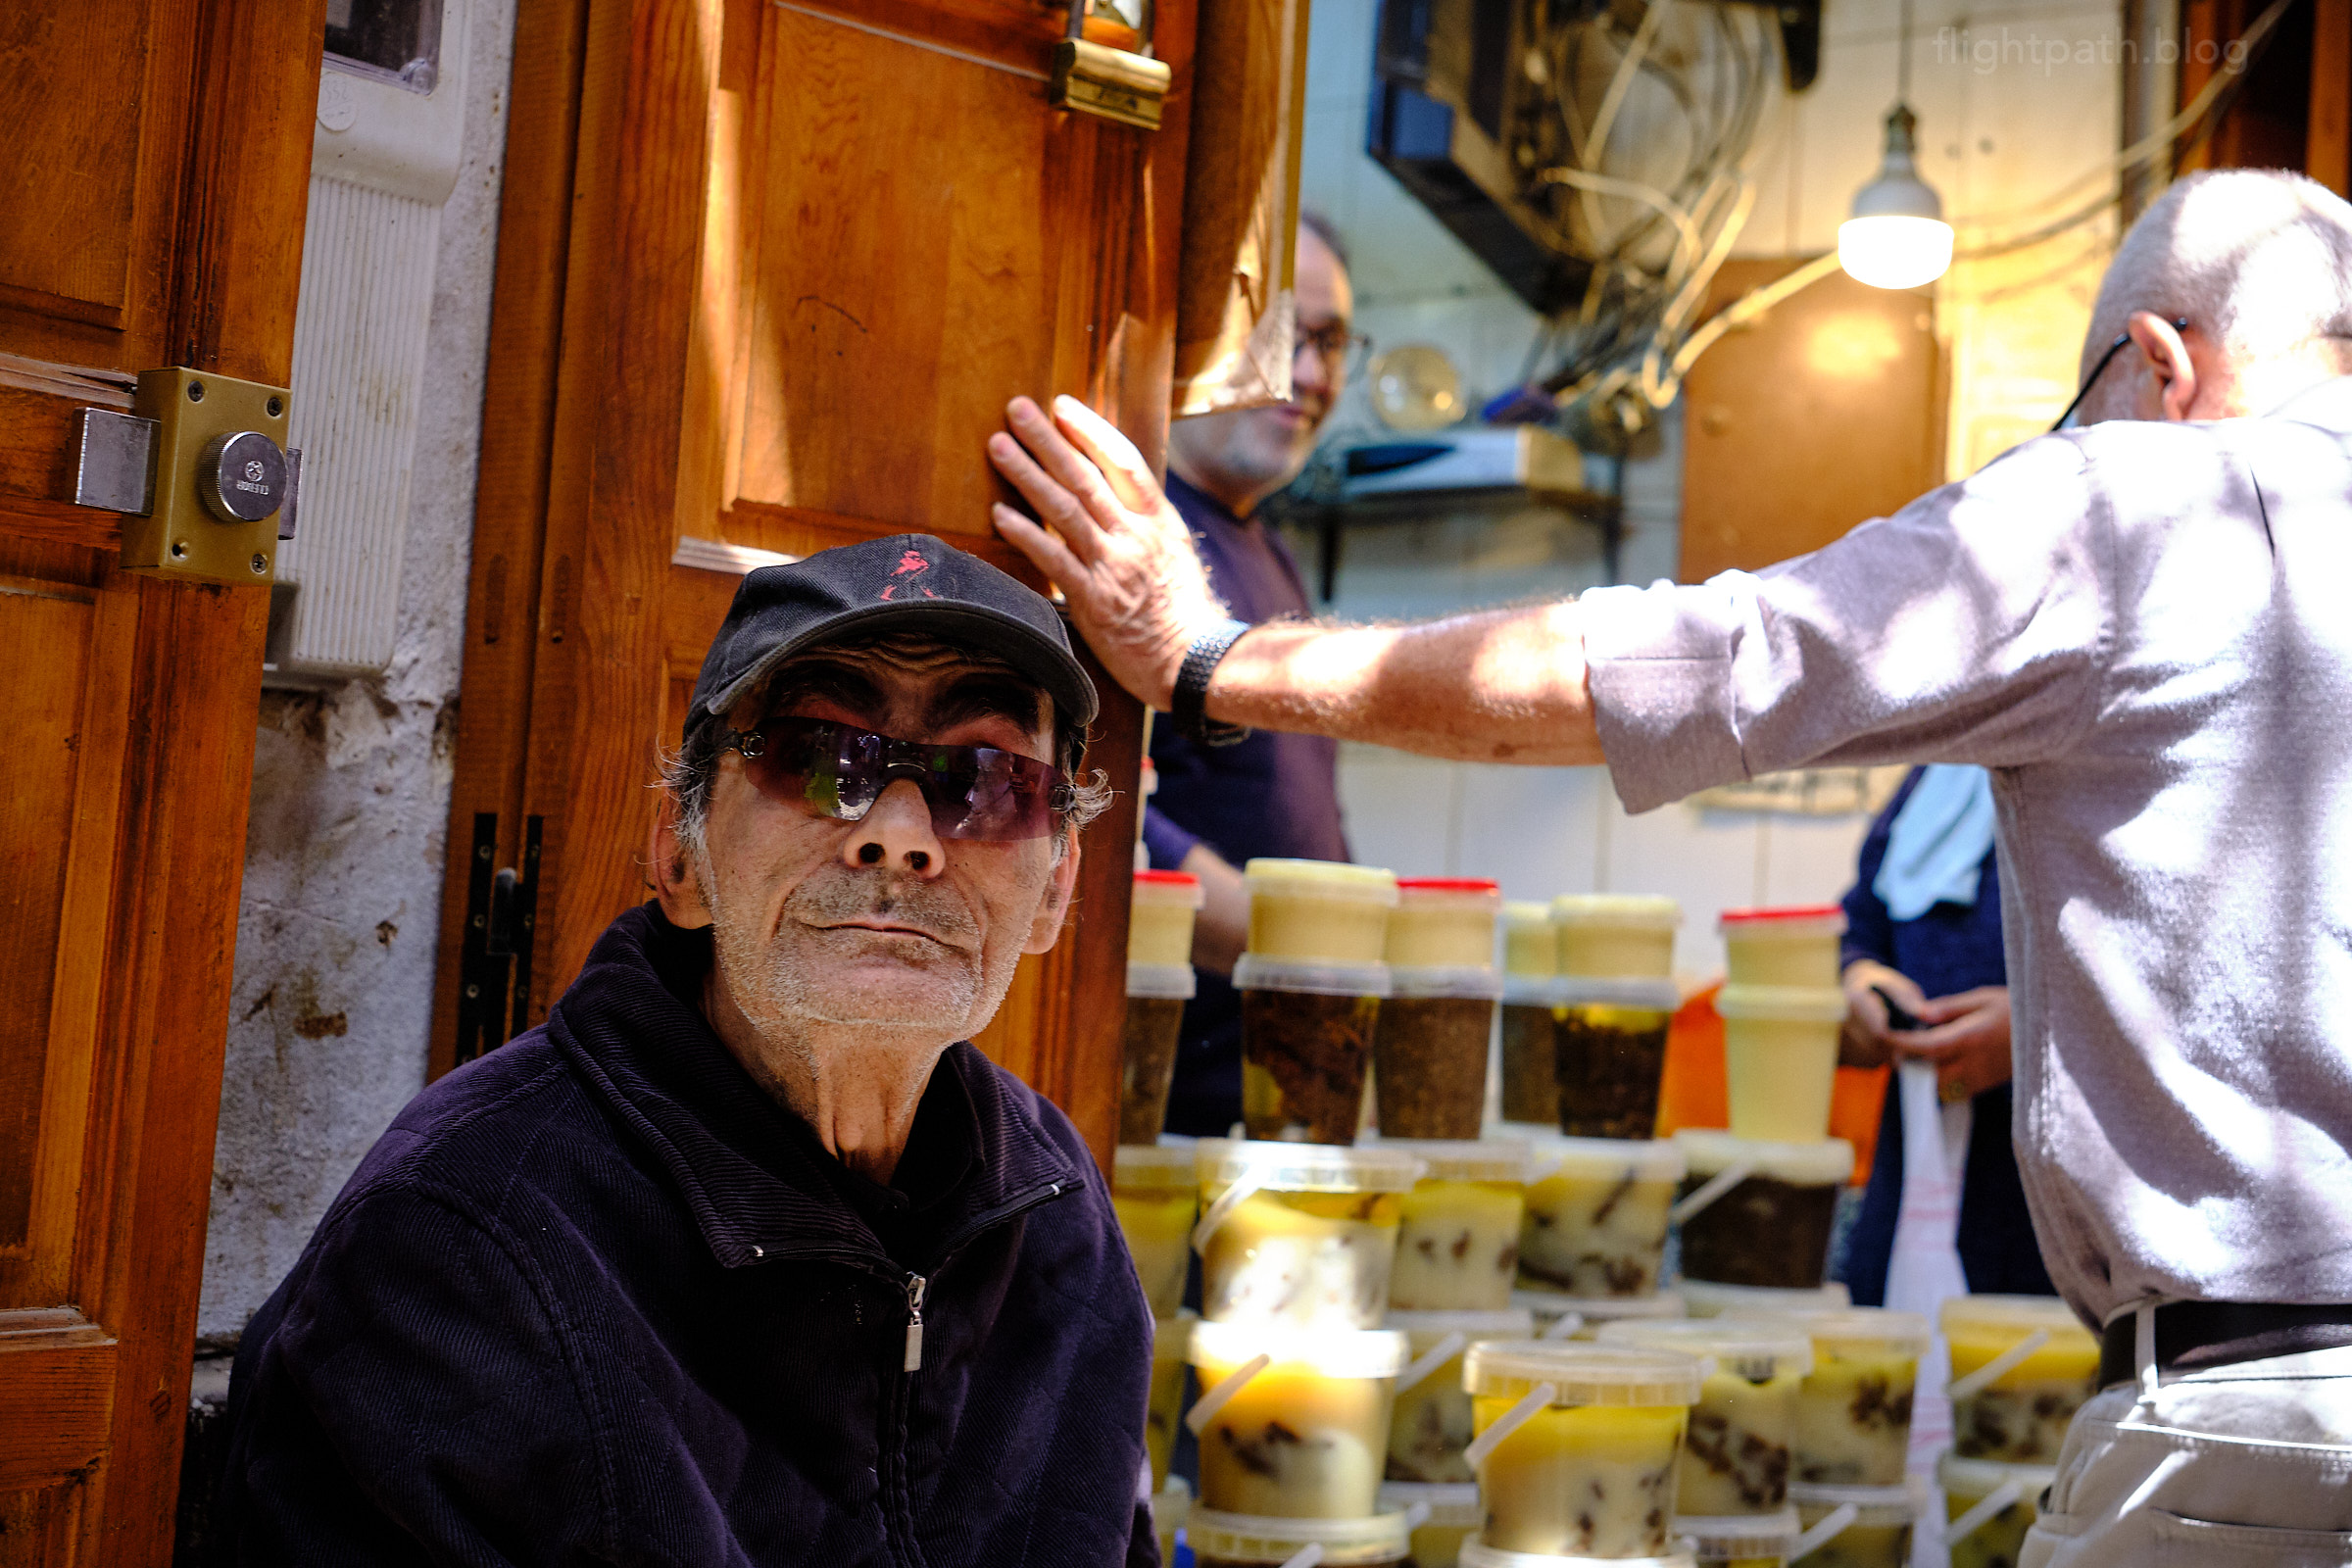 A man in a marketplace wearing a hat and sunglasses.